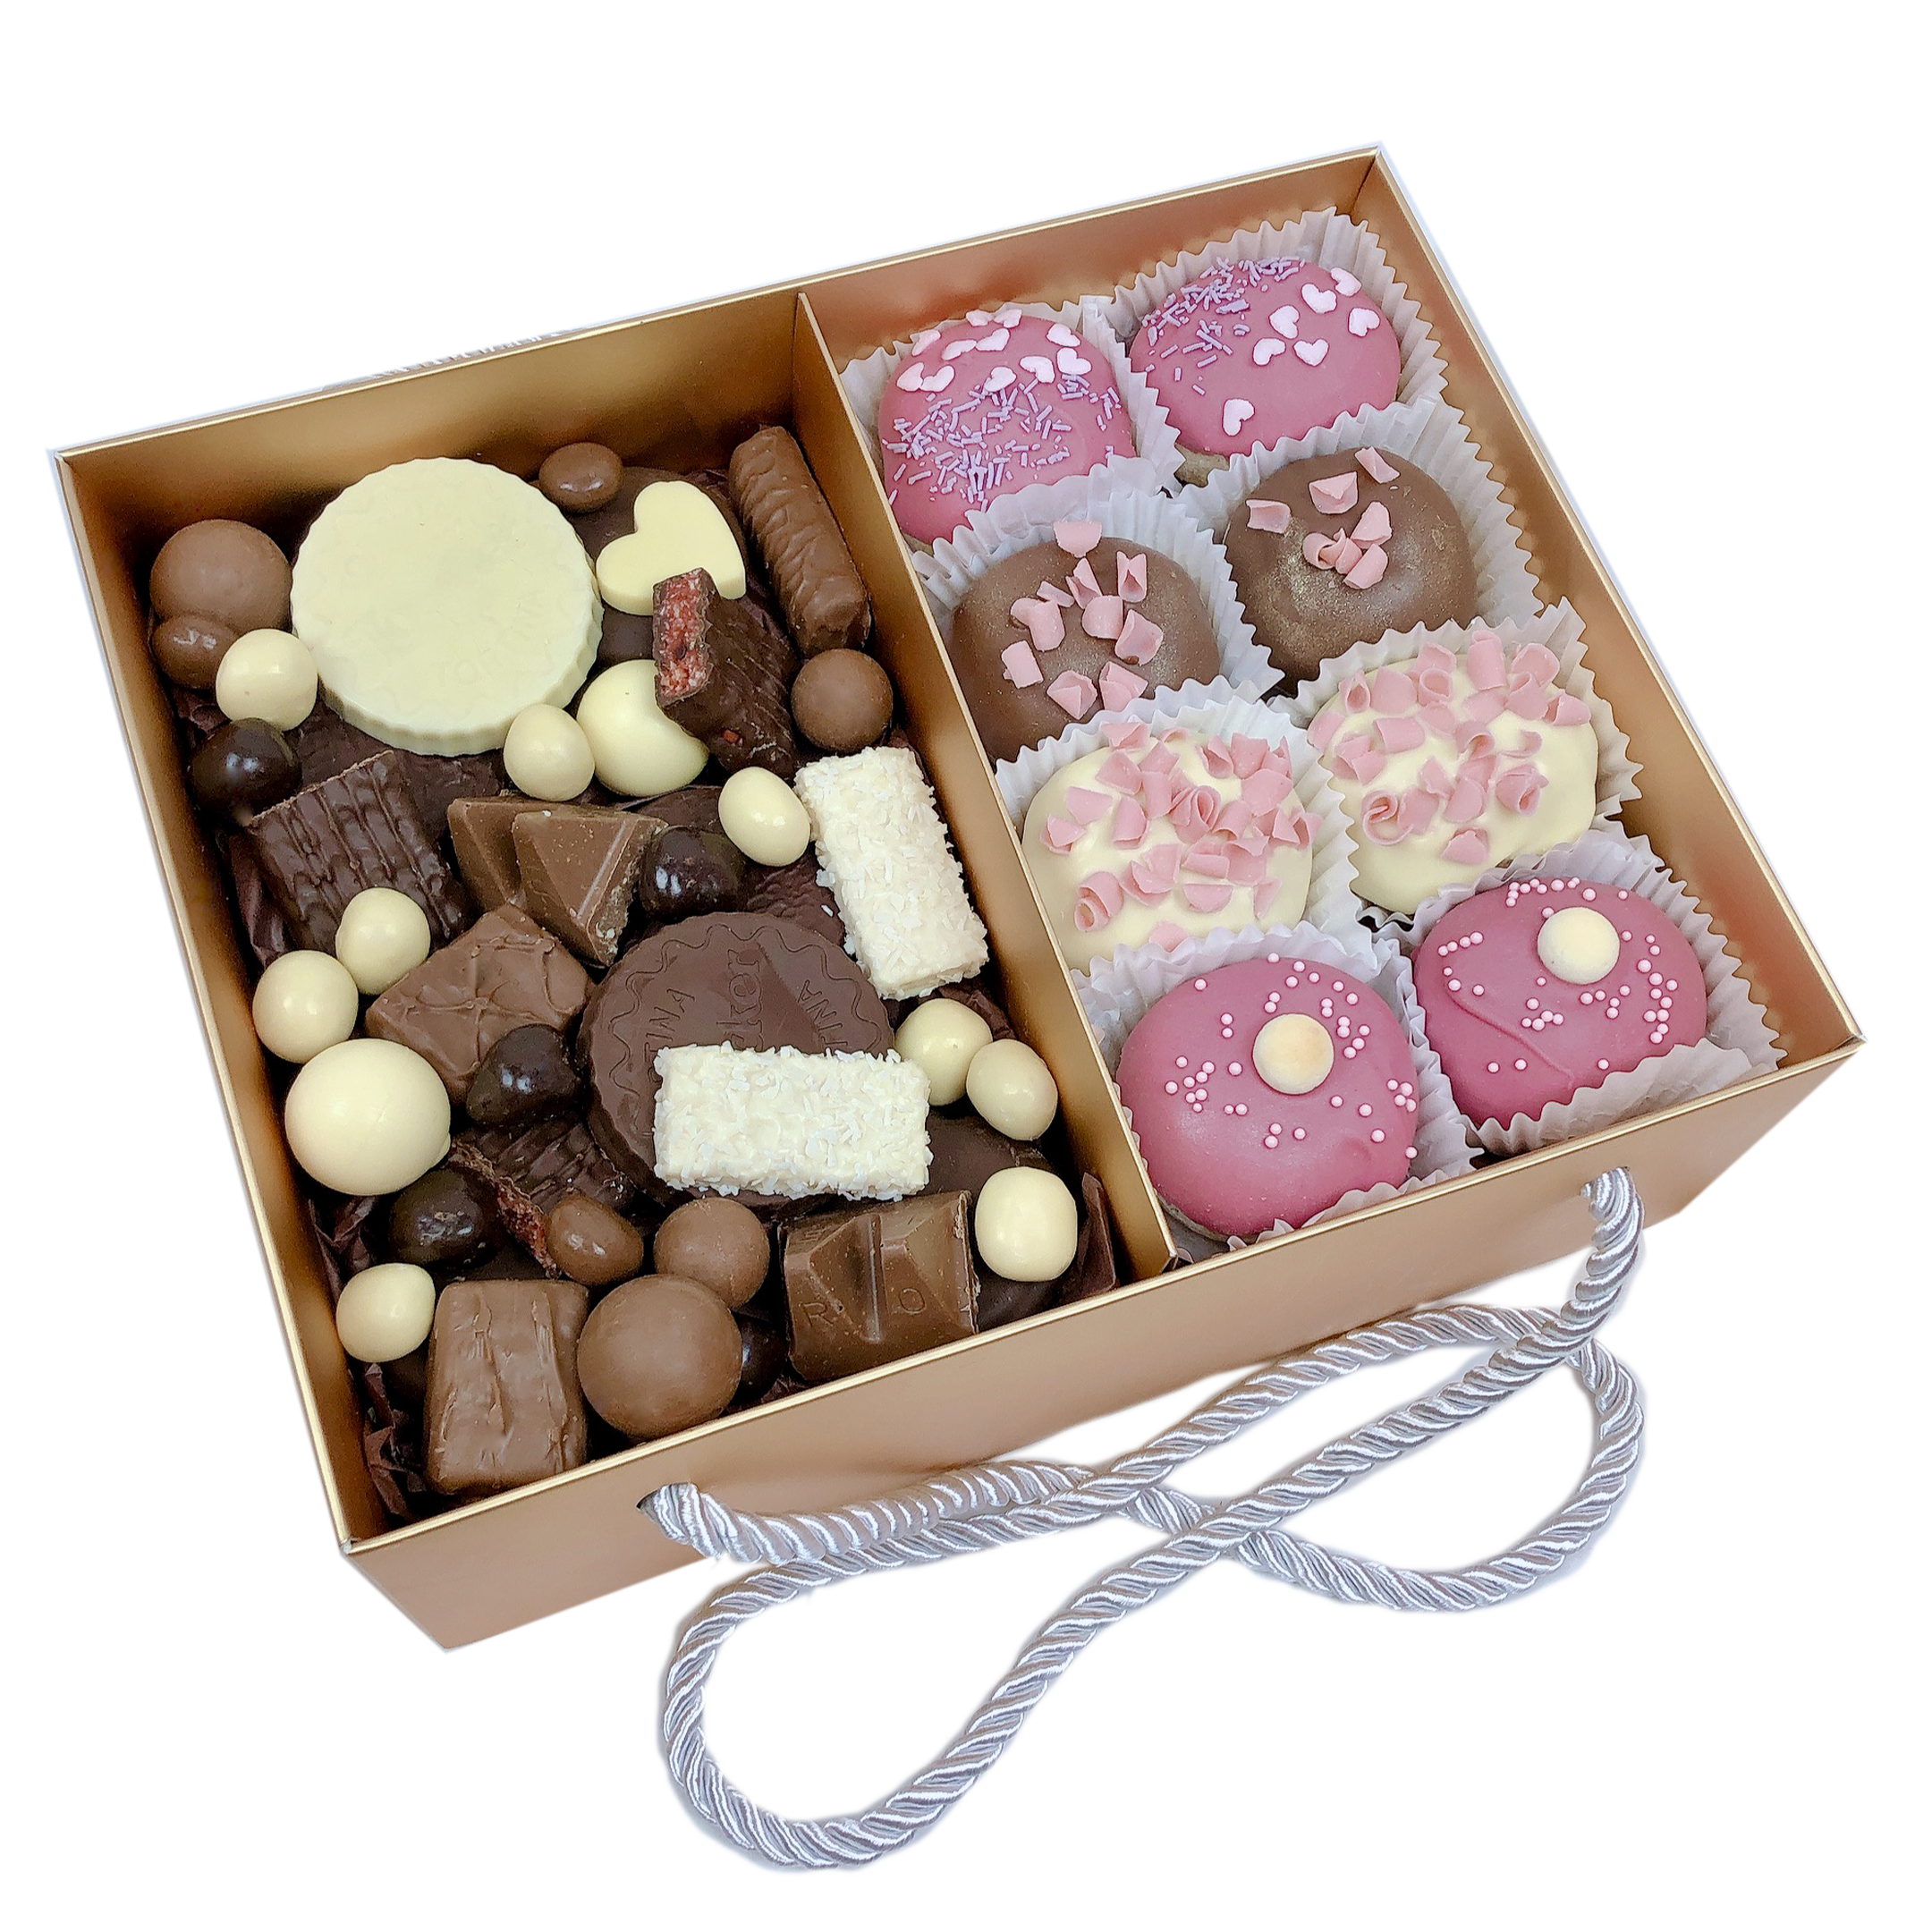 Chocolate Assortment & Donut Gift Hamper, online same day delivery in Adelaide Dessert boxes